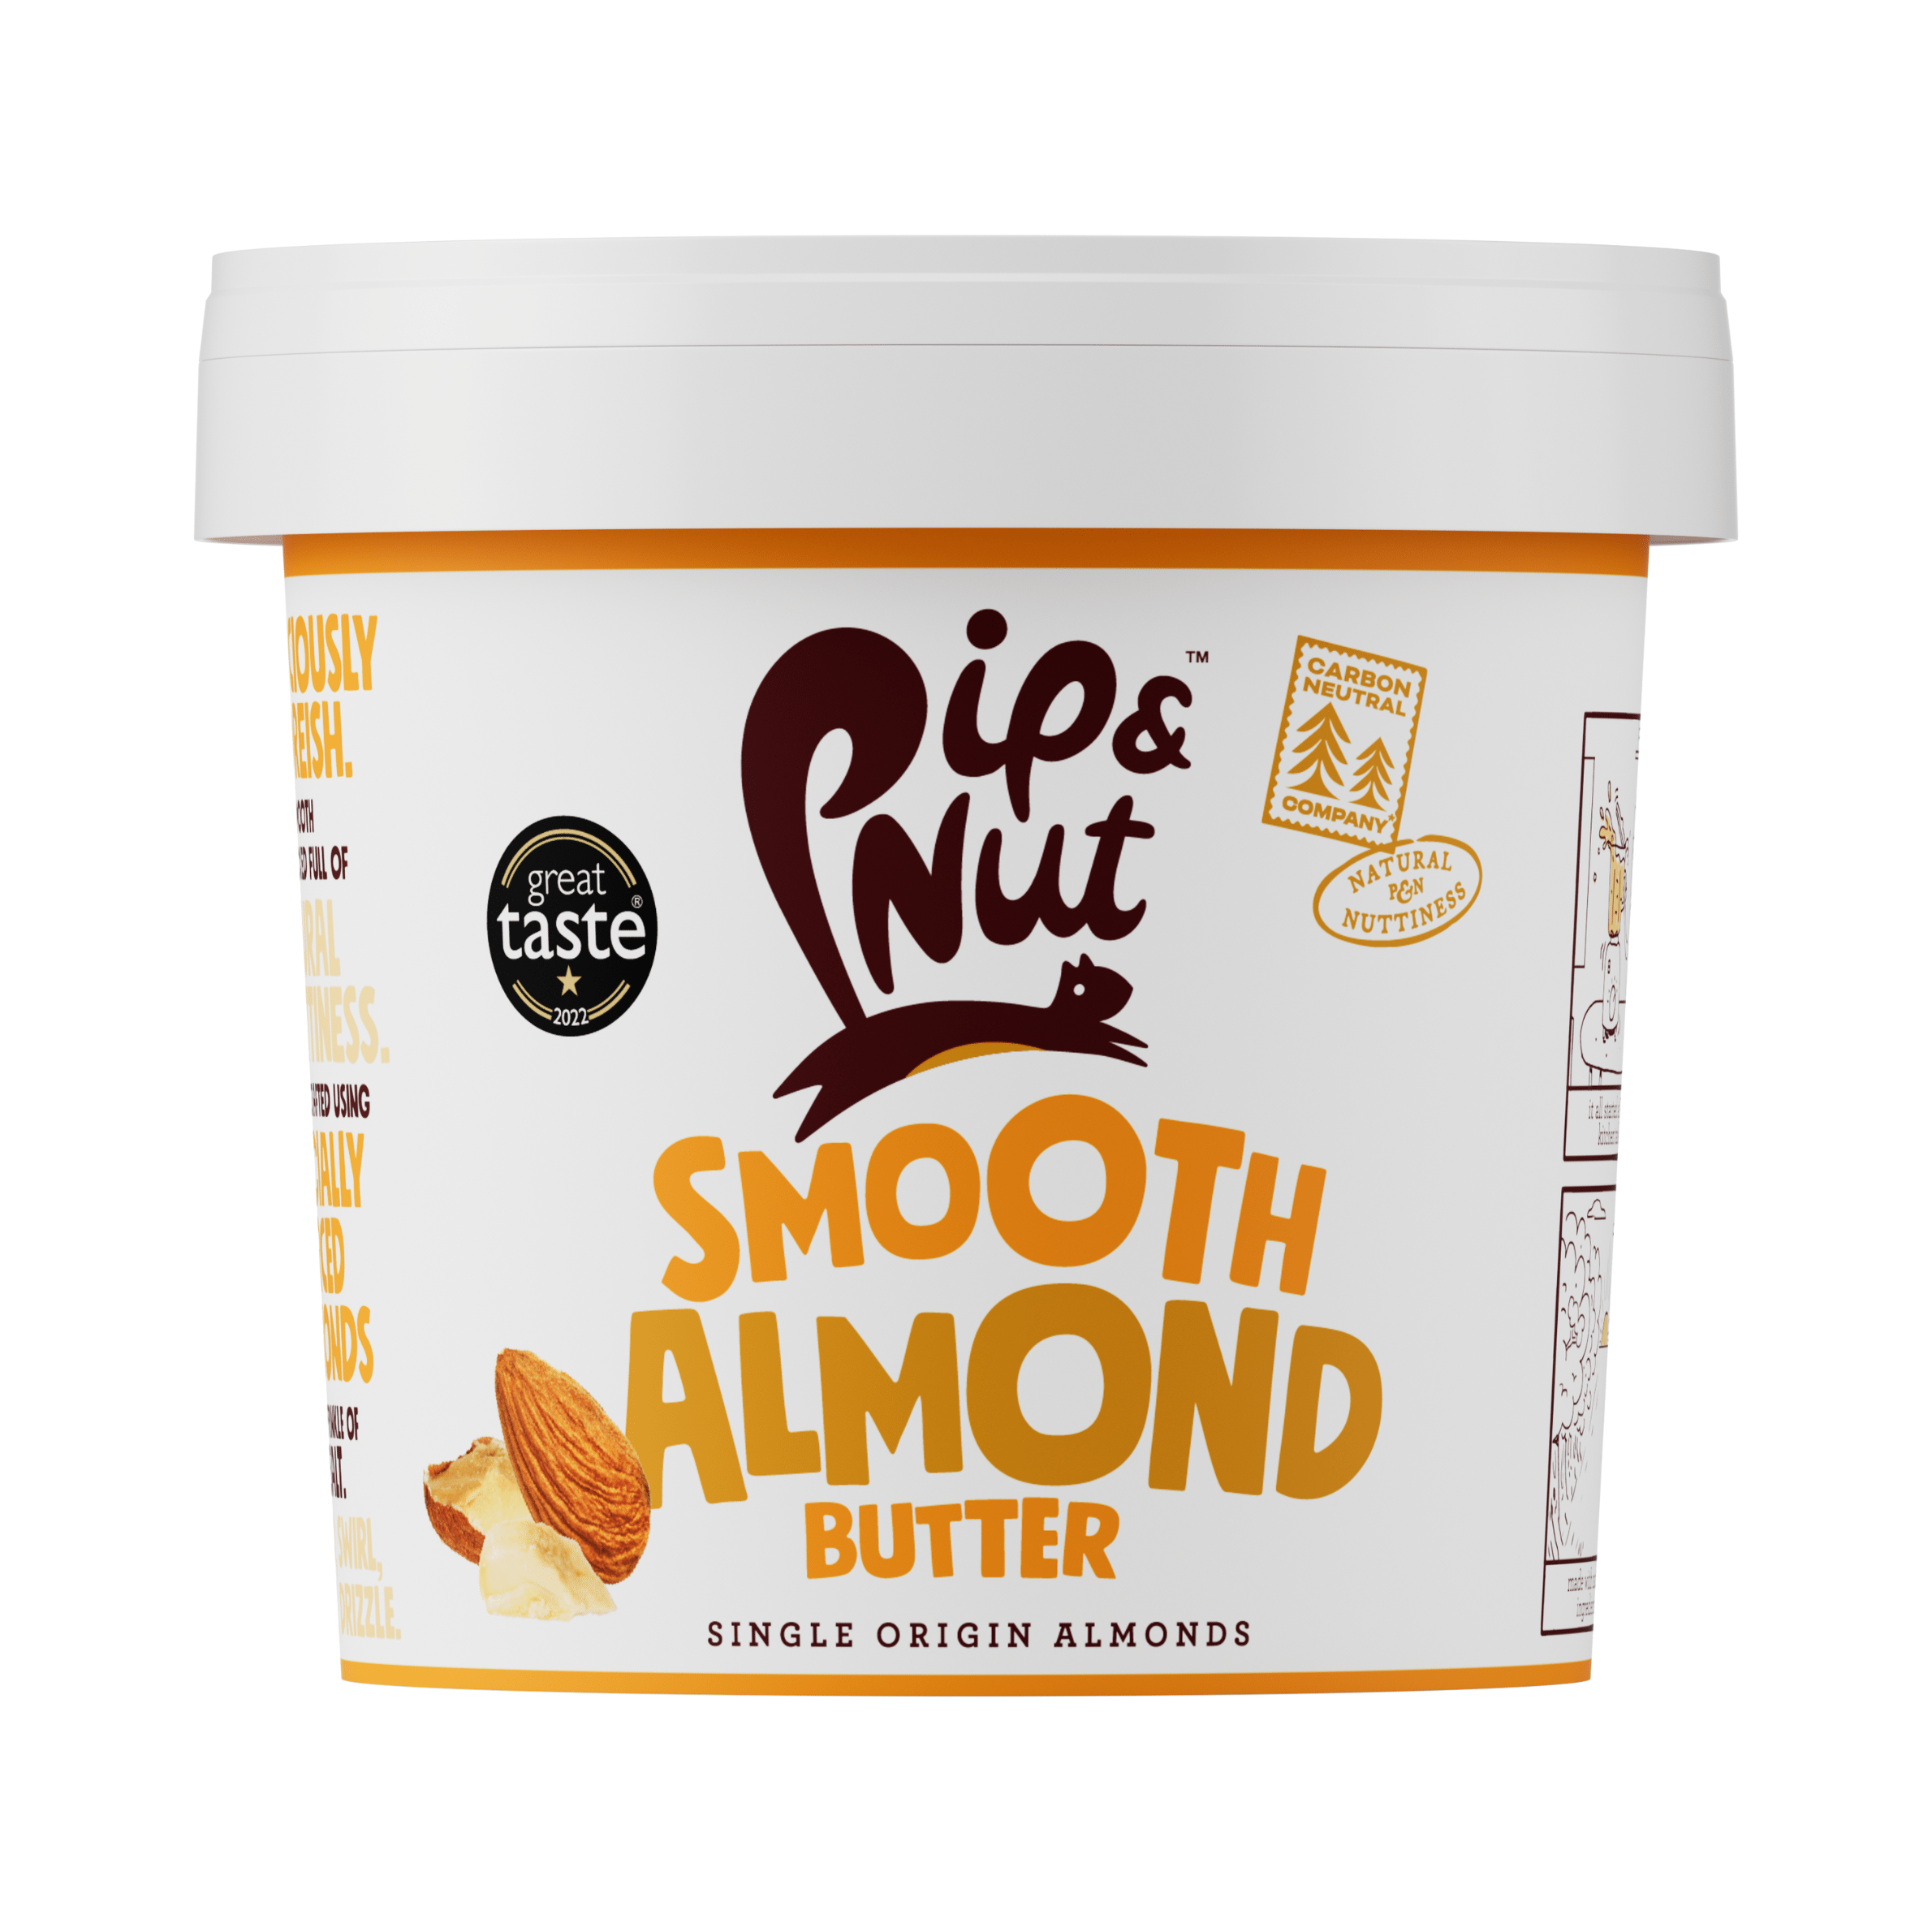 almond butter, smooth, pip & nut